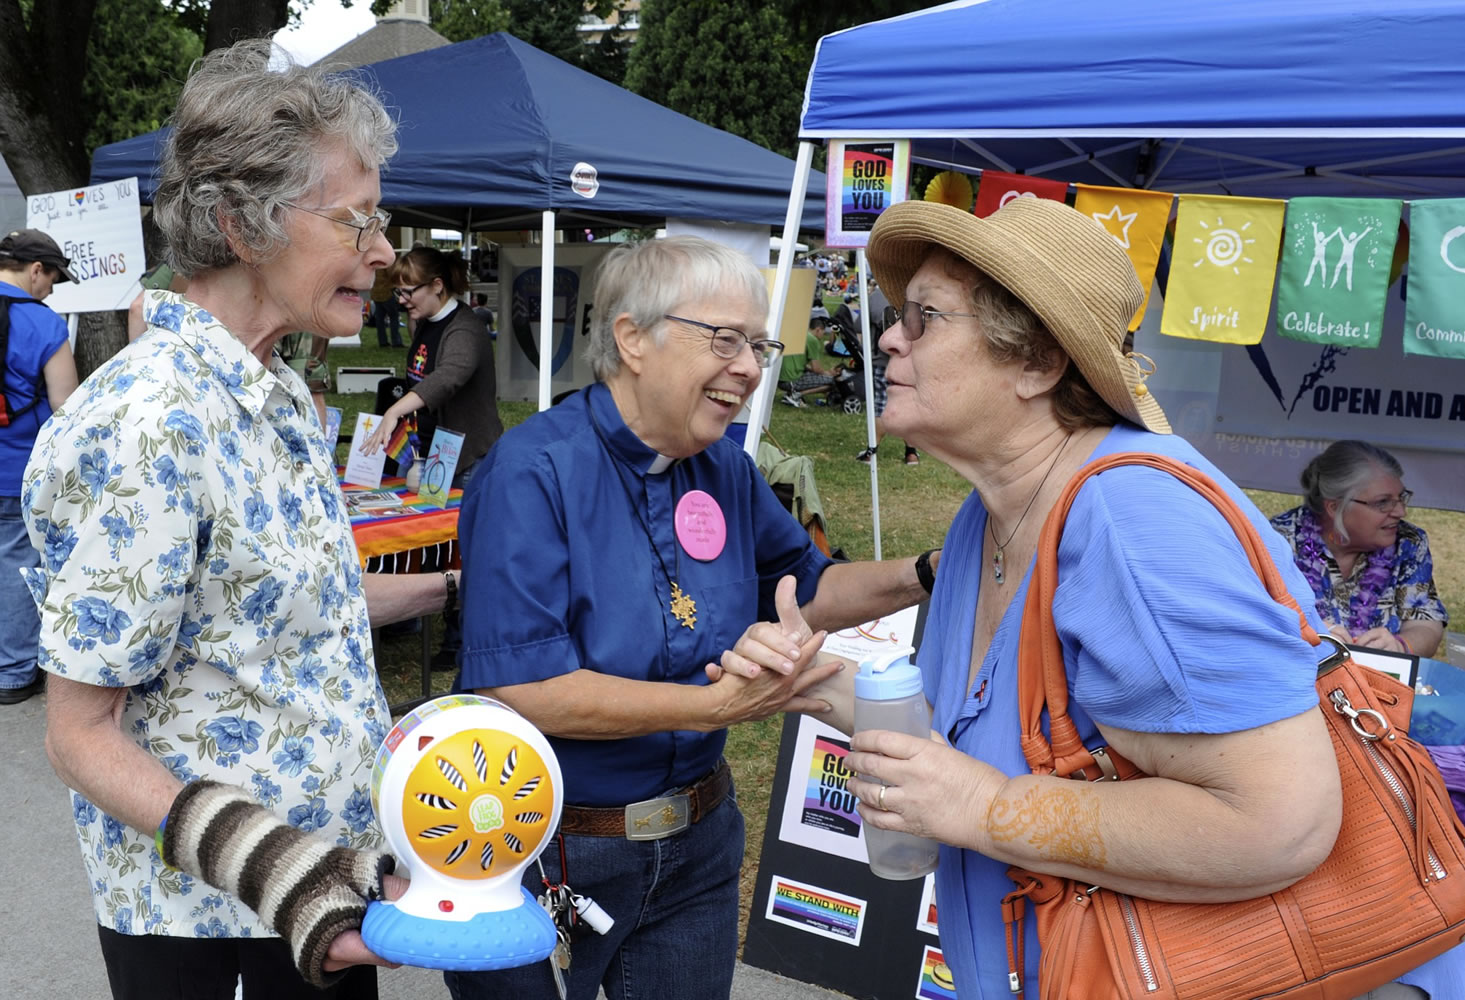 Adina Tarpley, left, and Carole Elizabeth, who have been together for 25 years, greet Lee Kendel, right, at this year's Saturday in the Park Pride event.